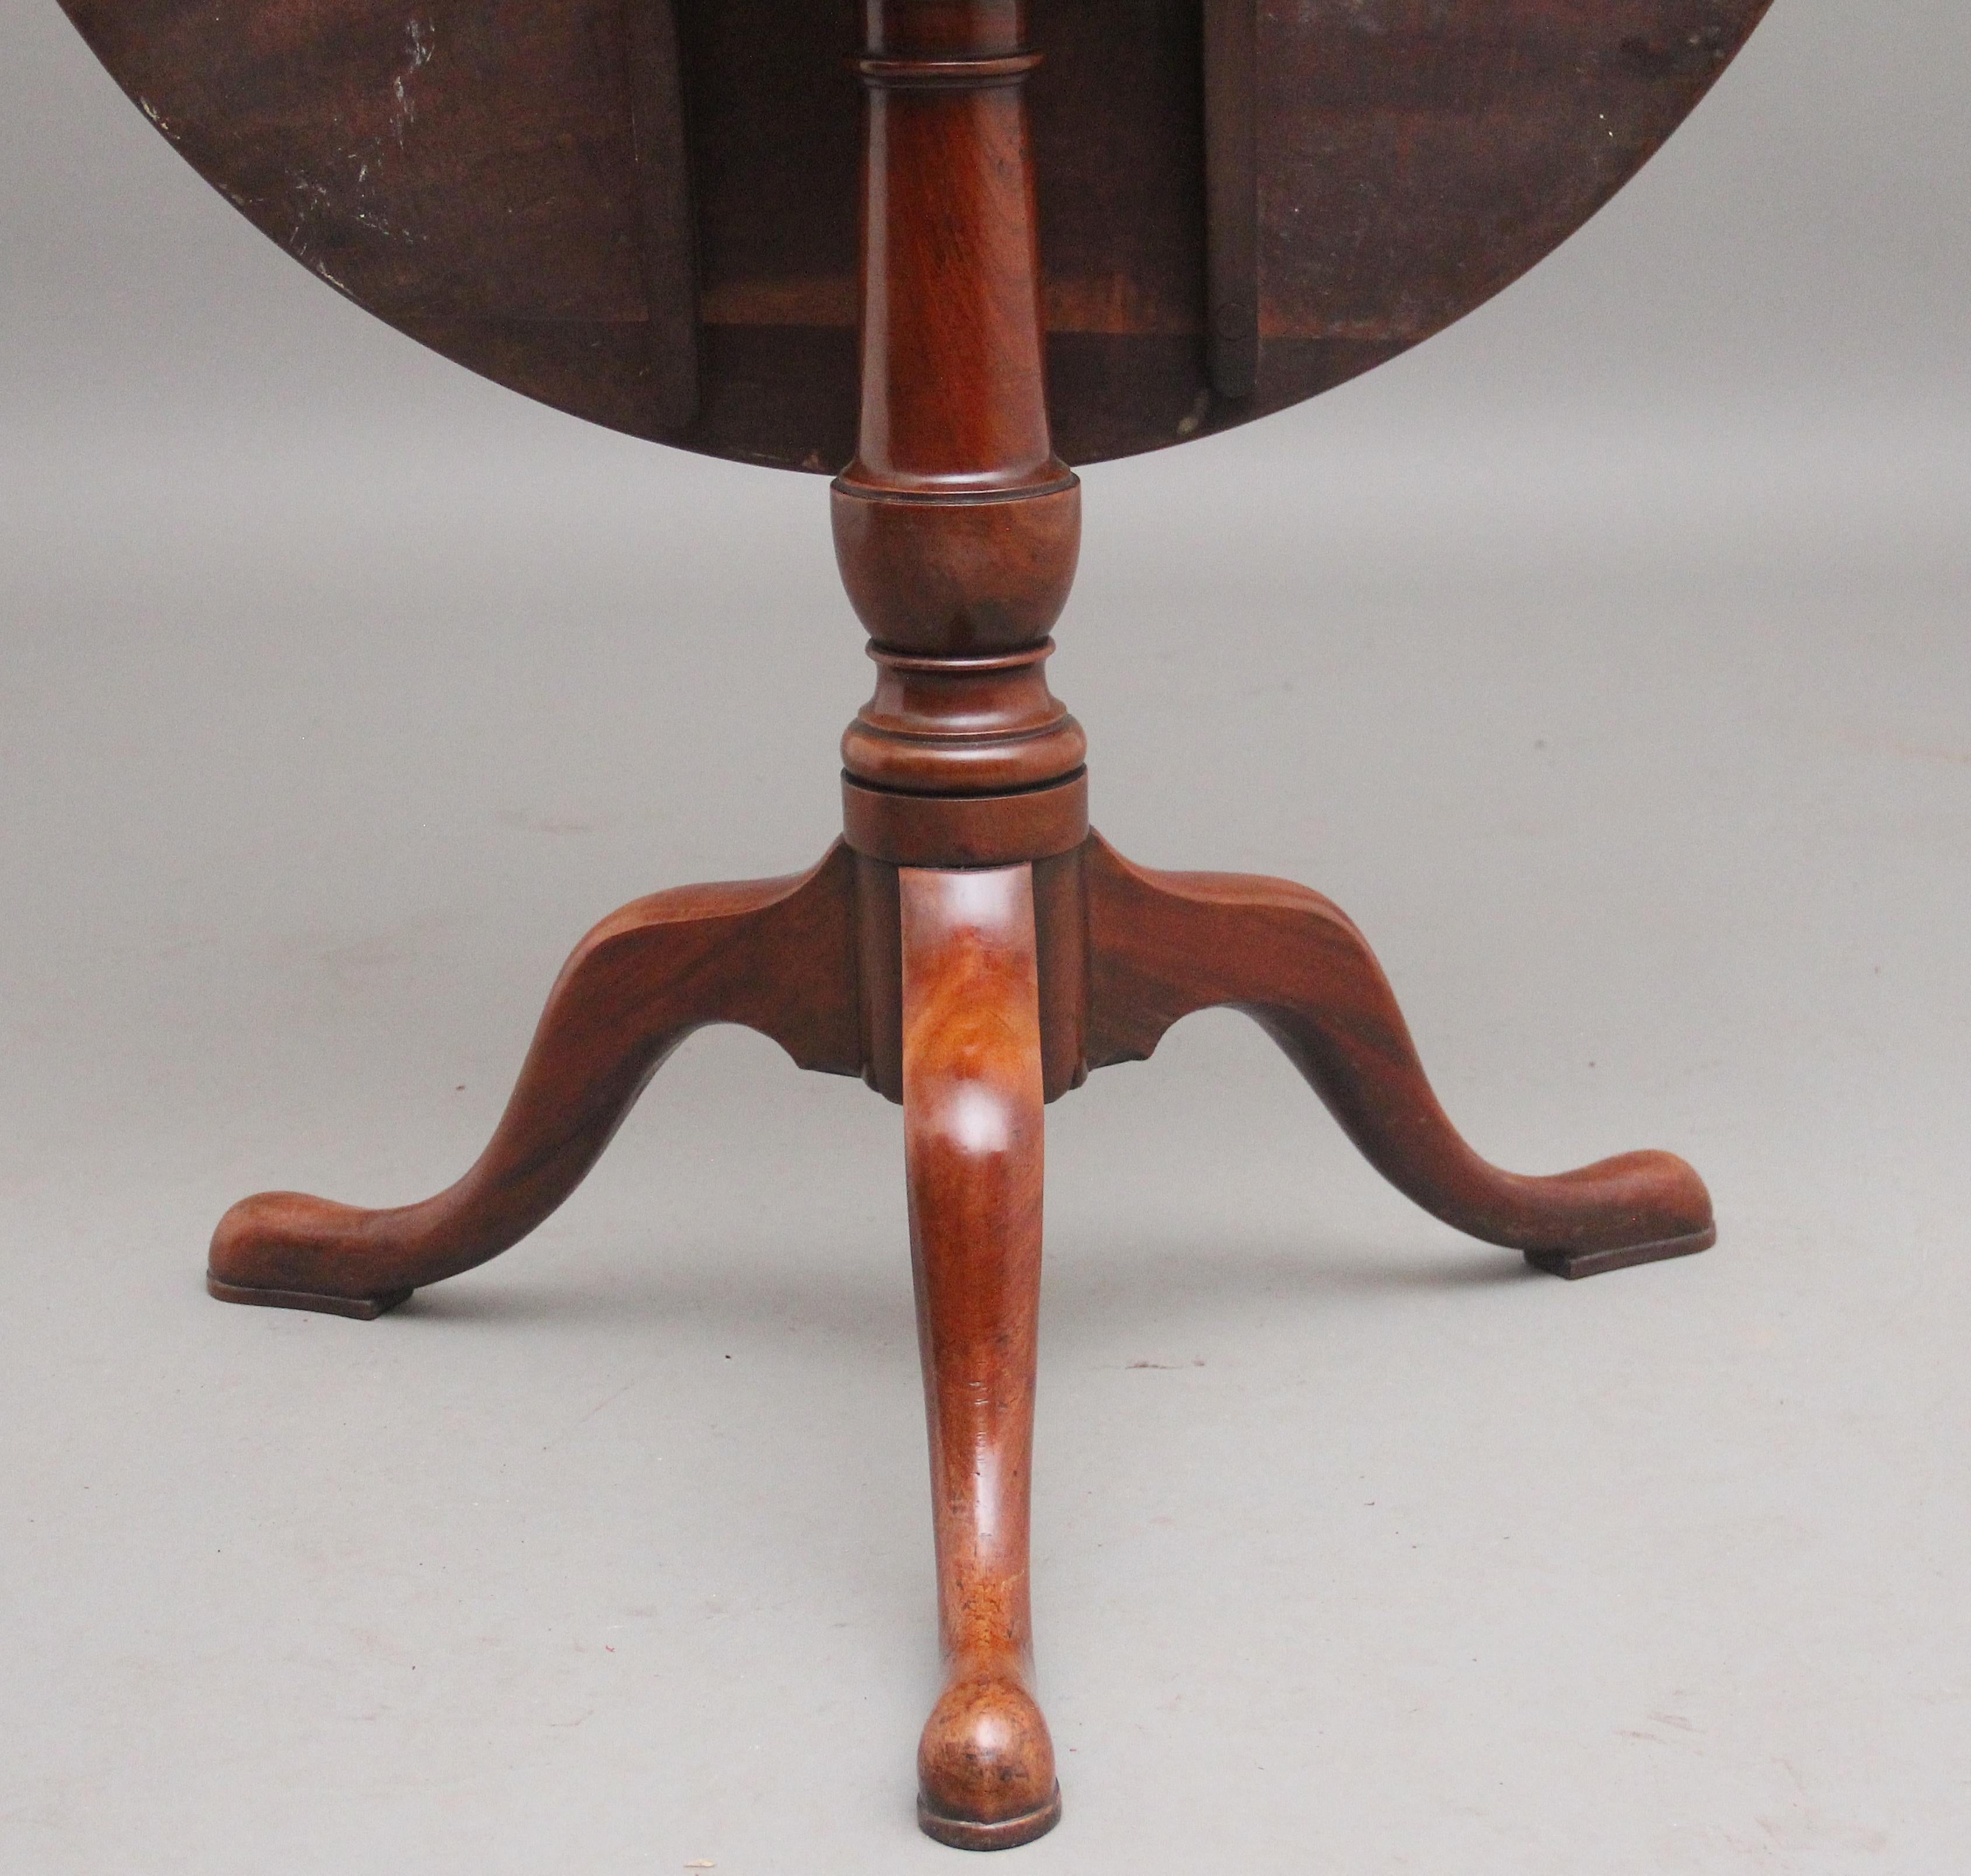 18th Century Antique Mahogany Tripod Table In Good Condition For Sale In Martlesham, GB